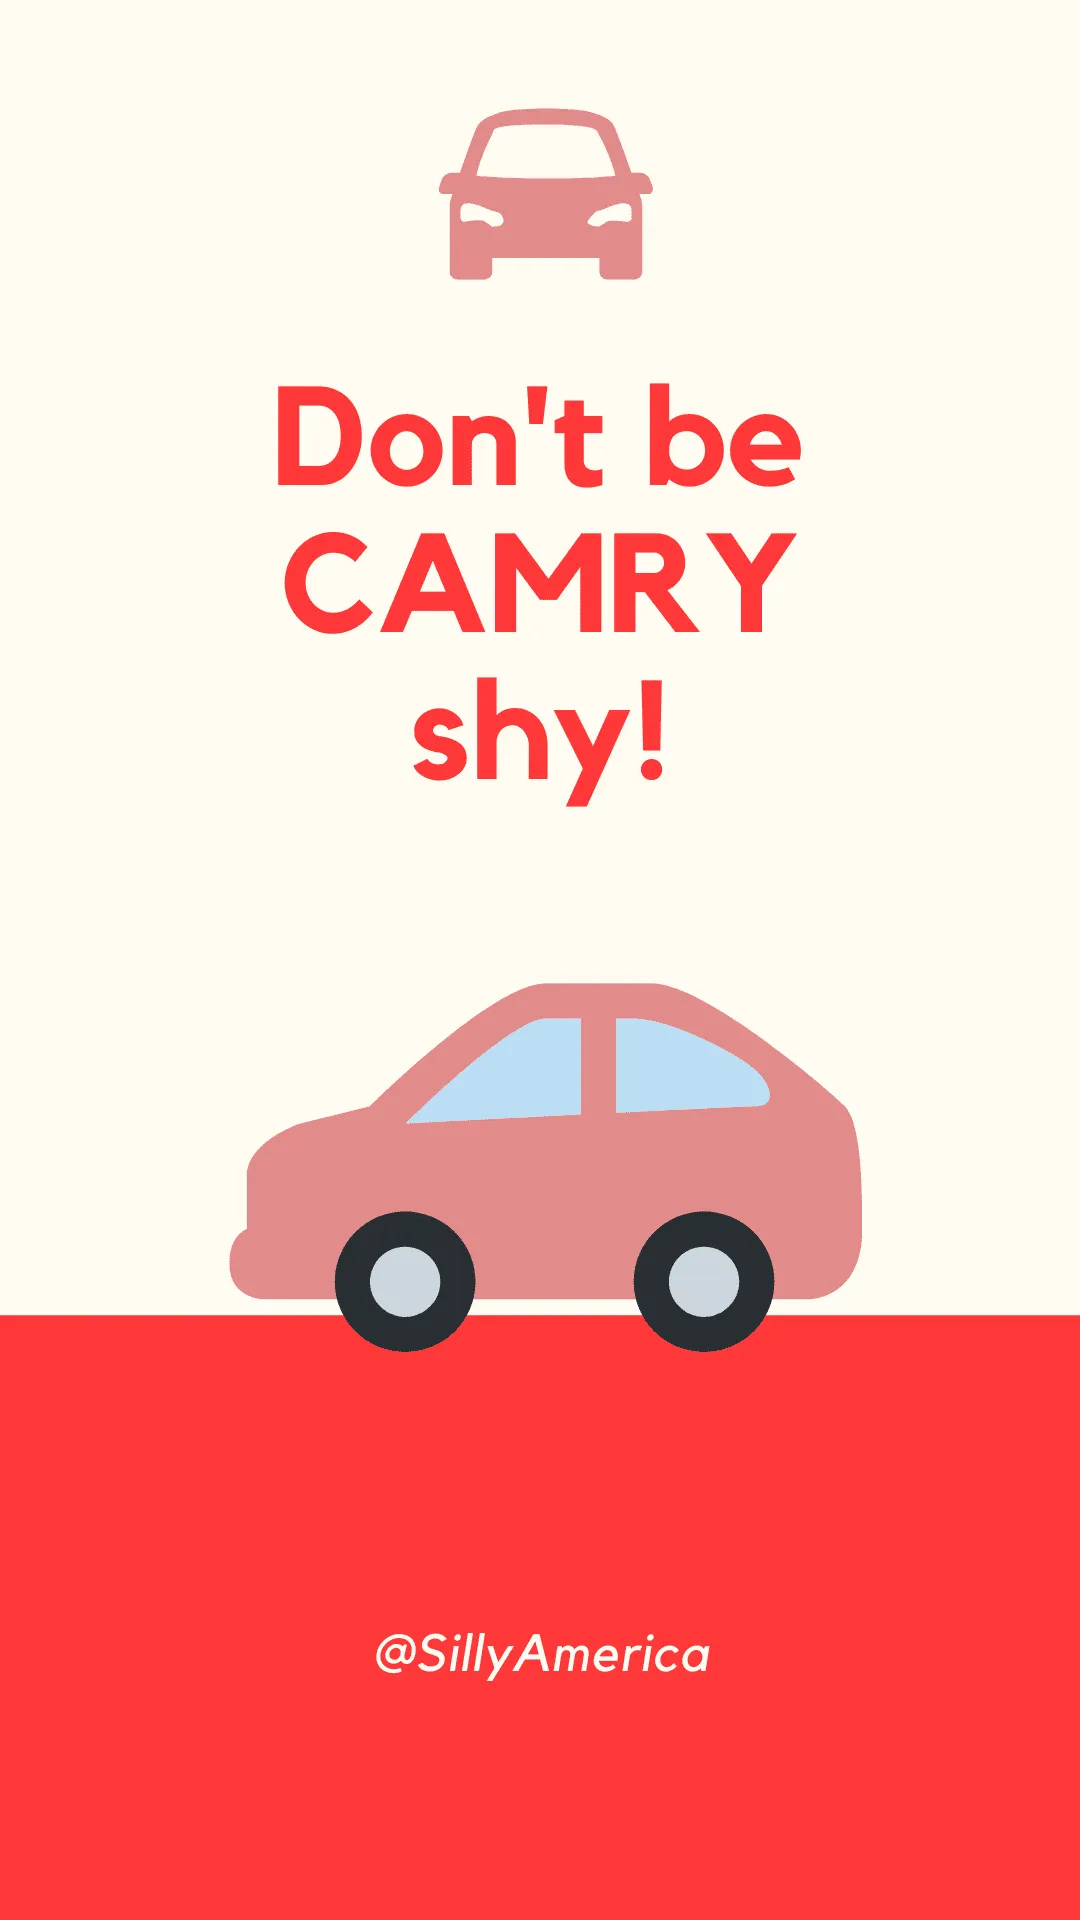 Don't be CAMRY shy! - Car Puns to fuel your road trip content!